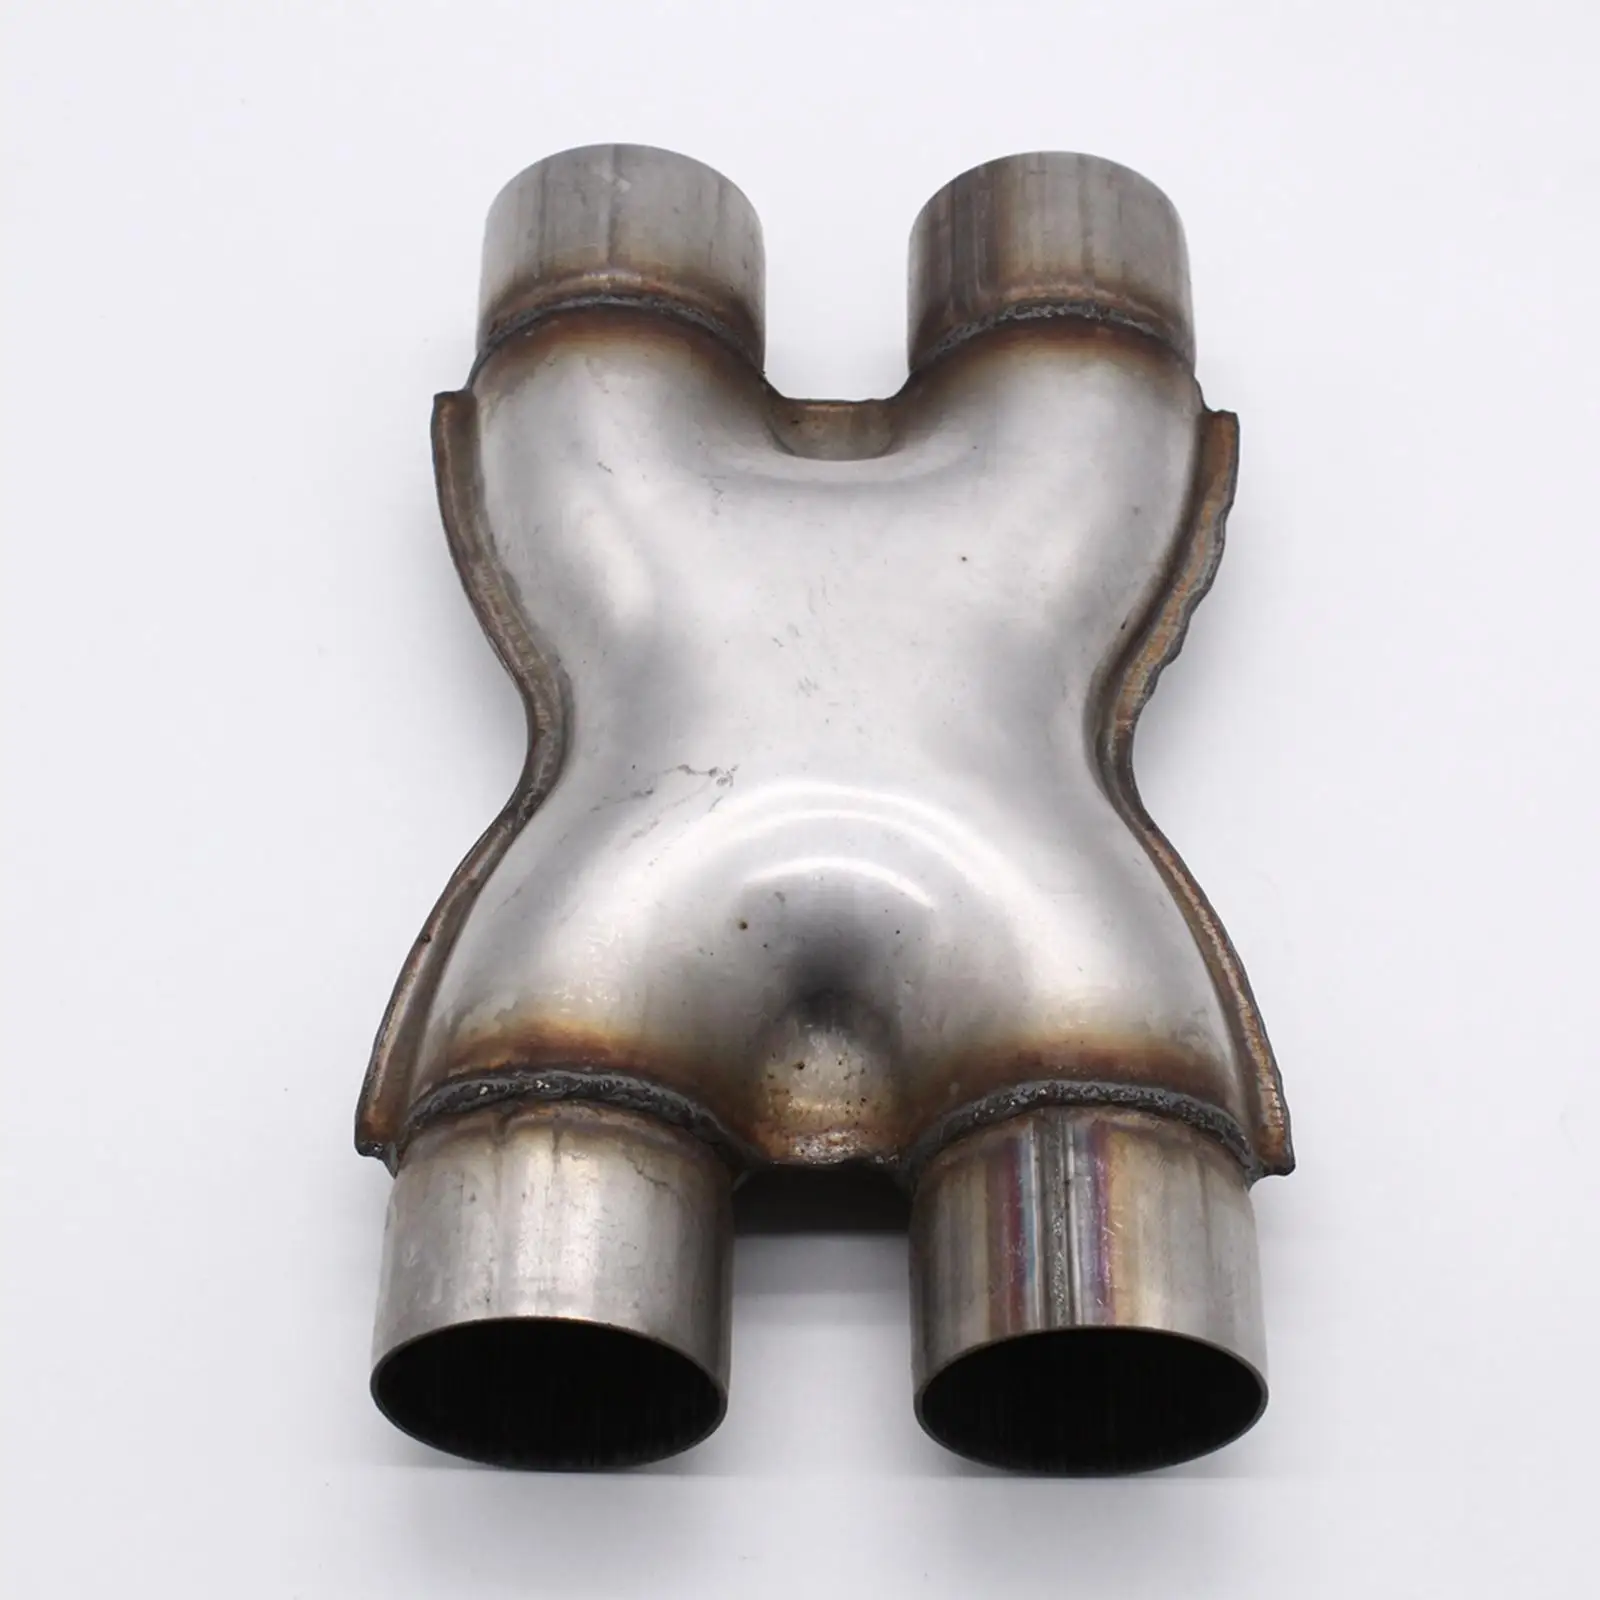 Muffler Exhaust Tip 304 Stainless Steel Car Accessories Durable Spare Parts Premium High Performance Universal Crossover x Pipe